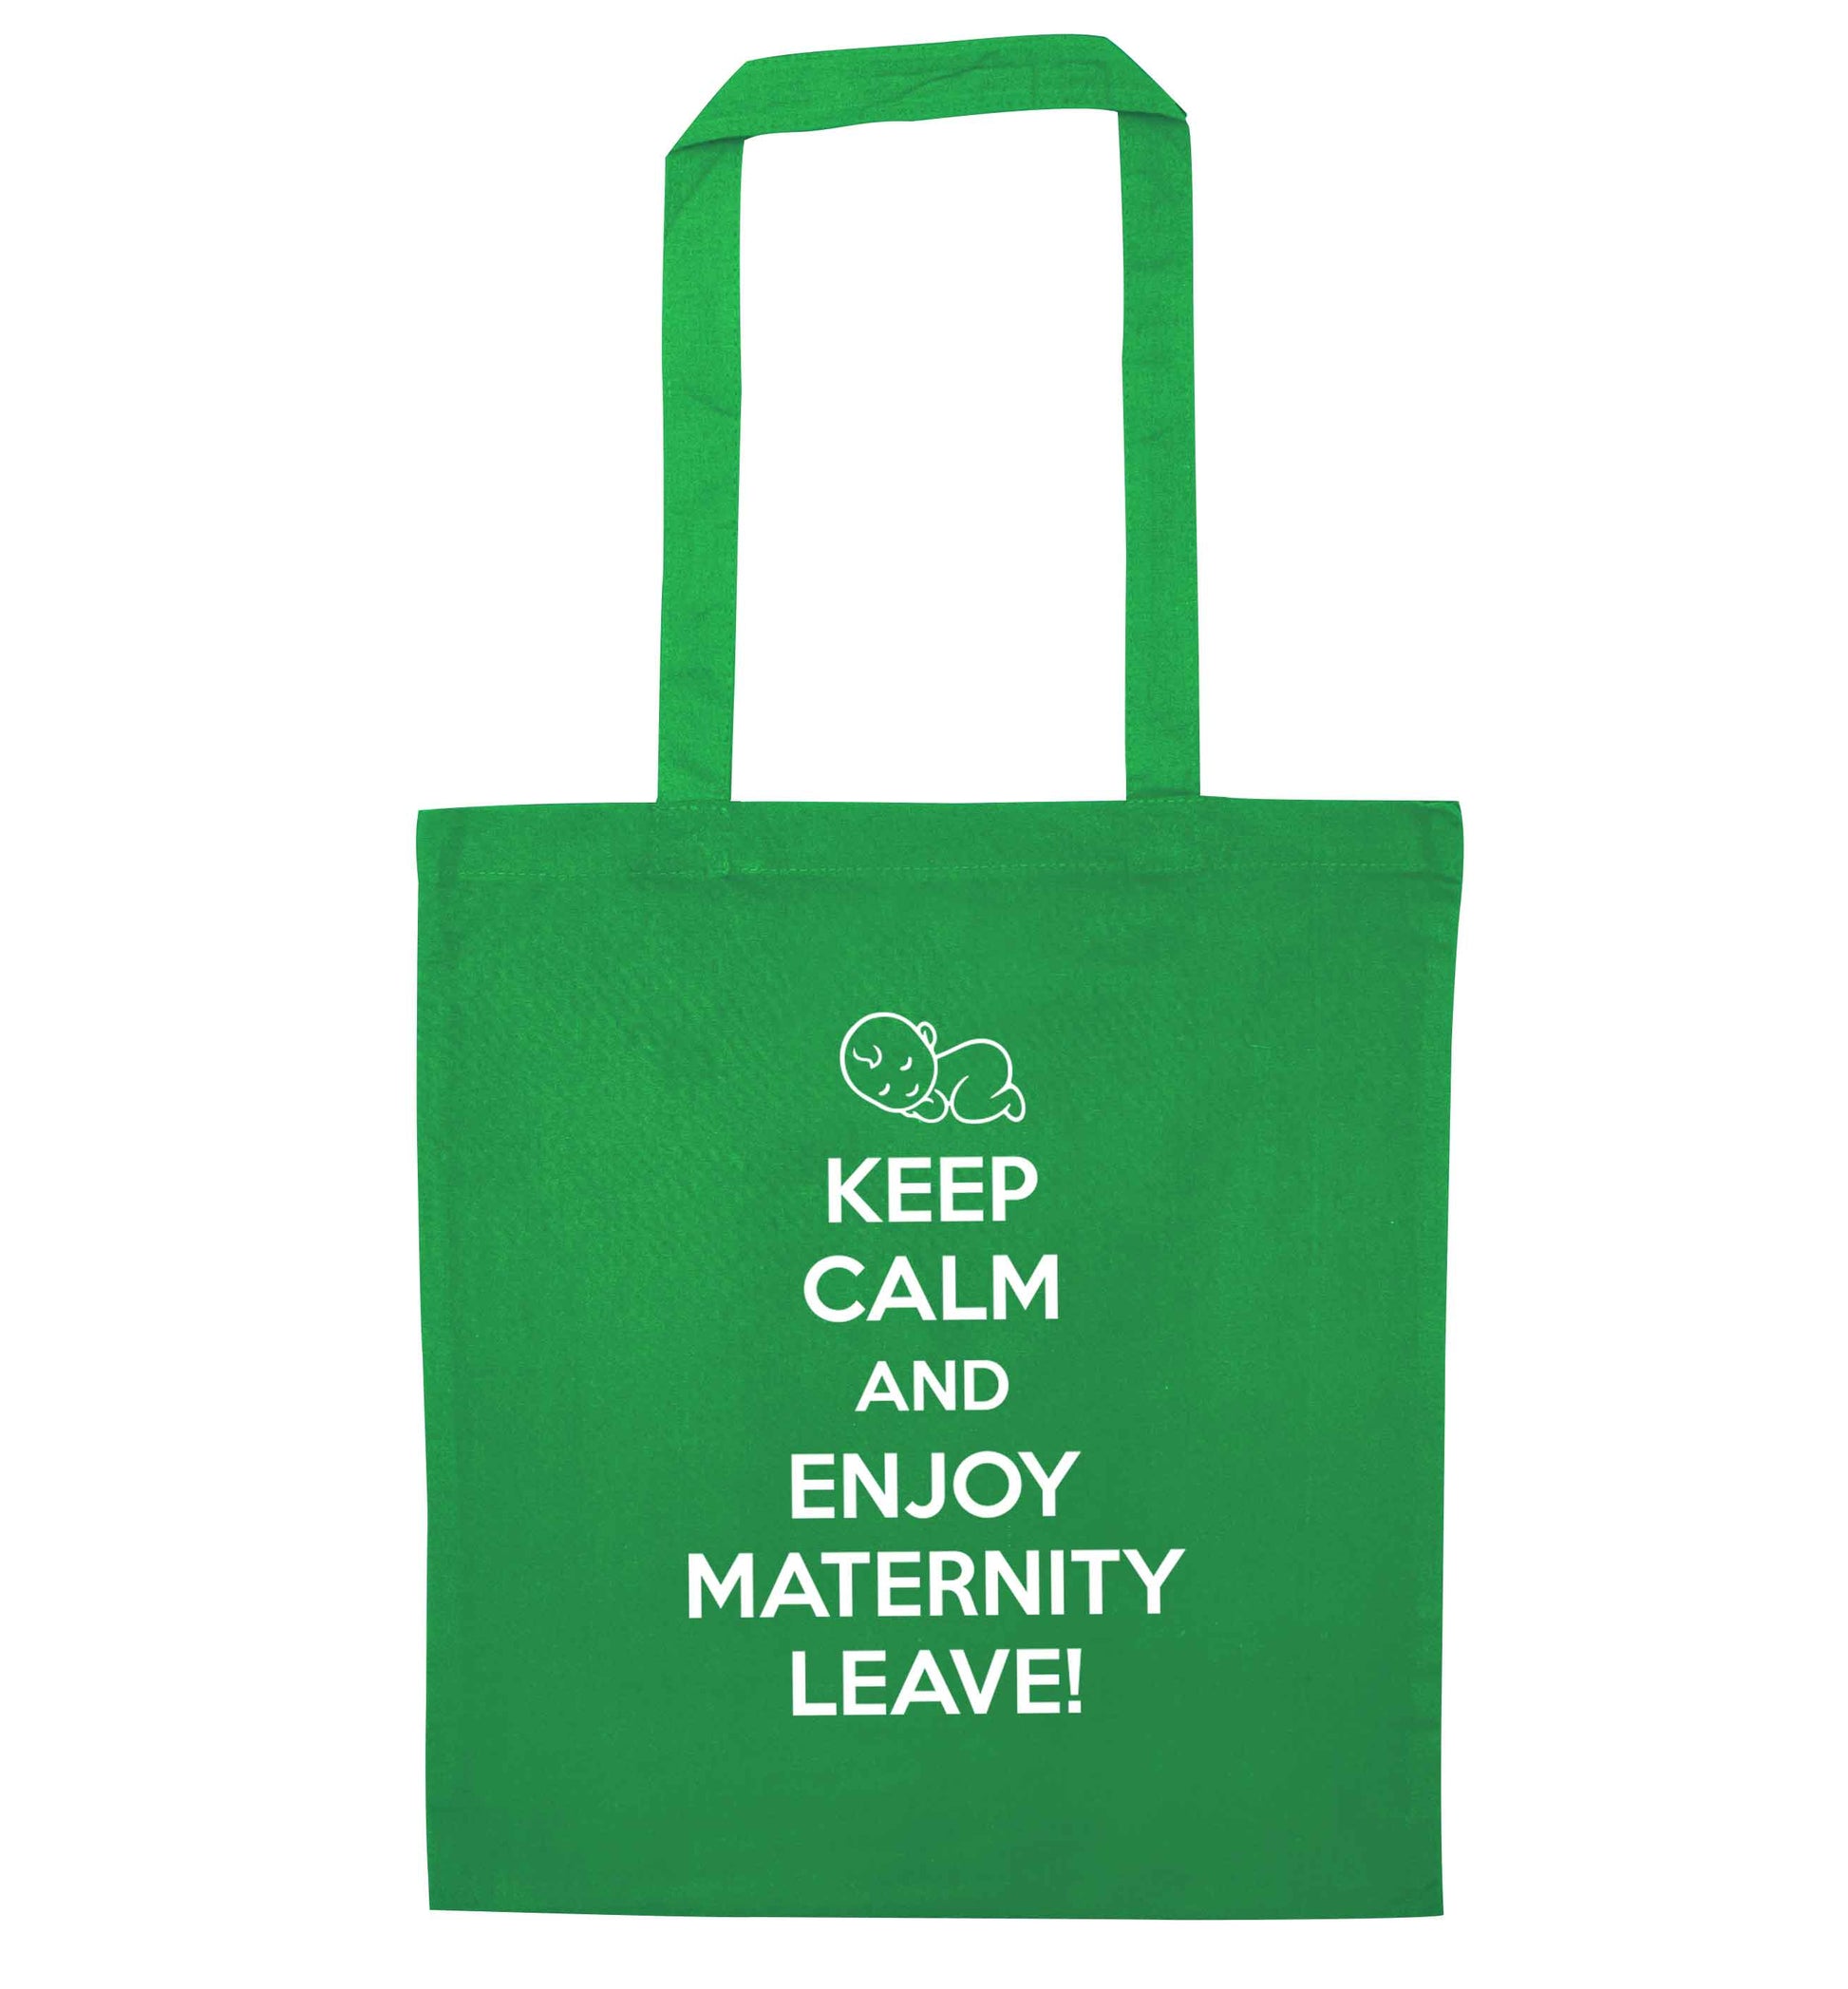 Keep calm and enjoy maternity leave green tote bag